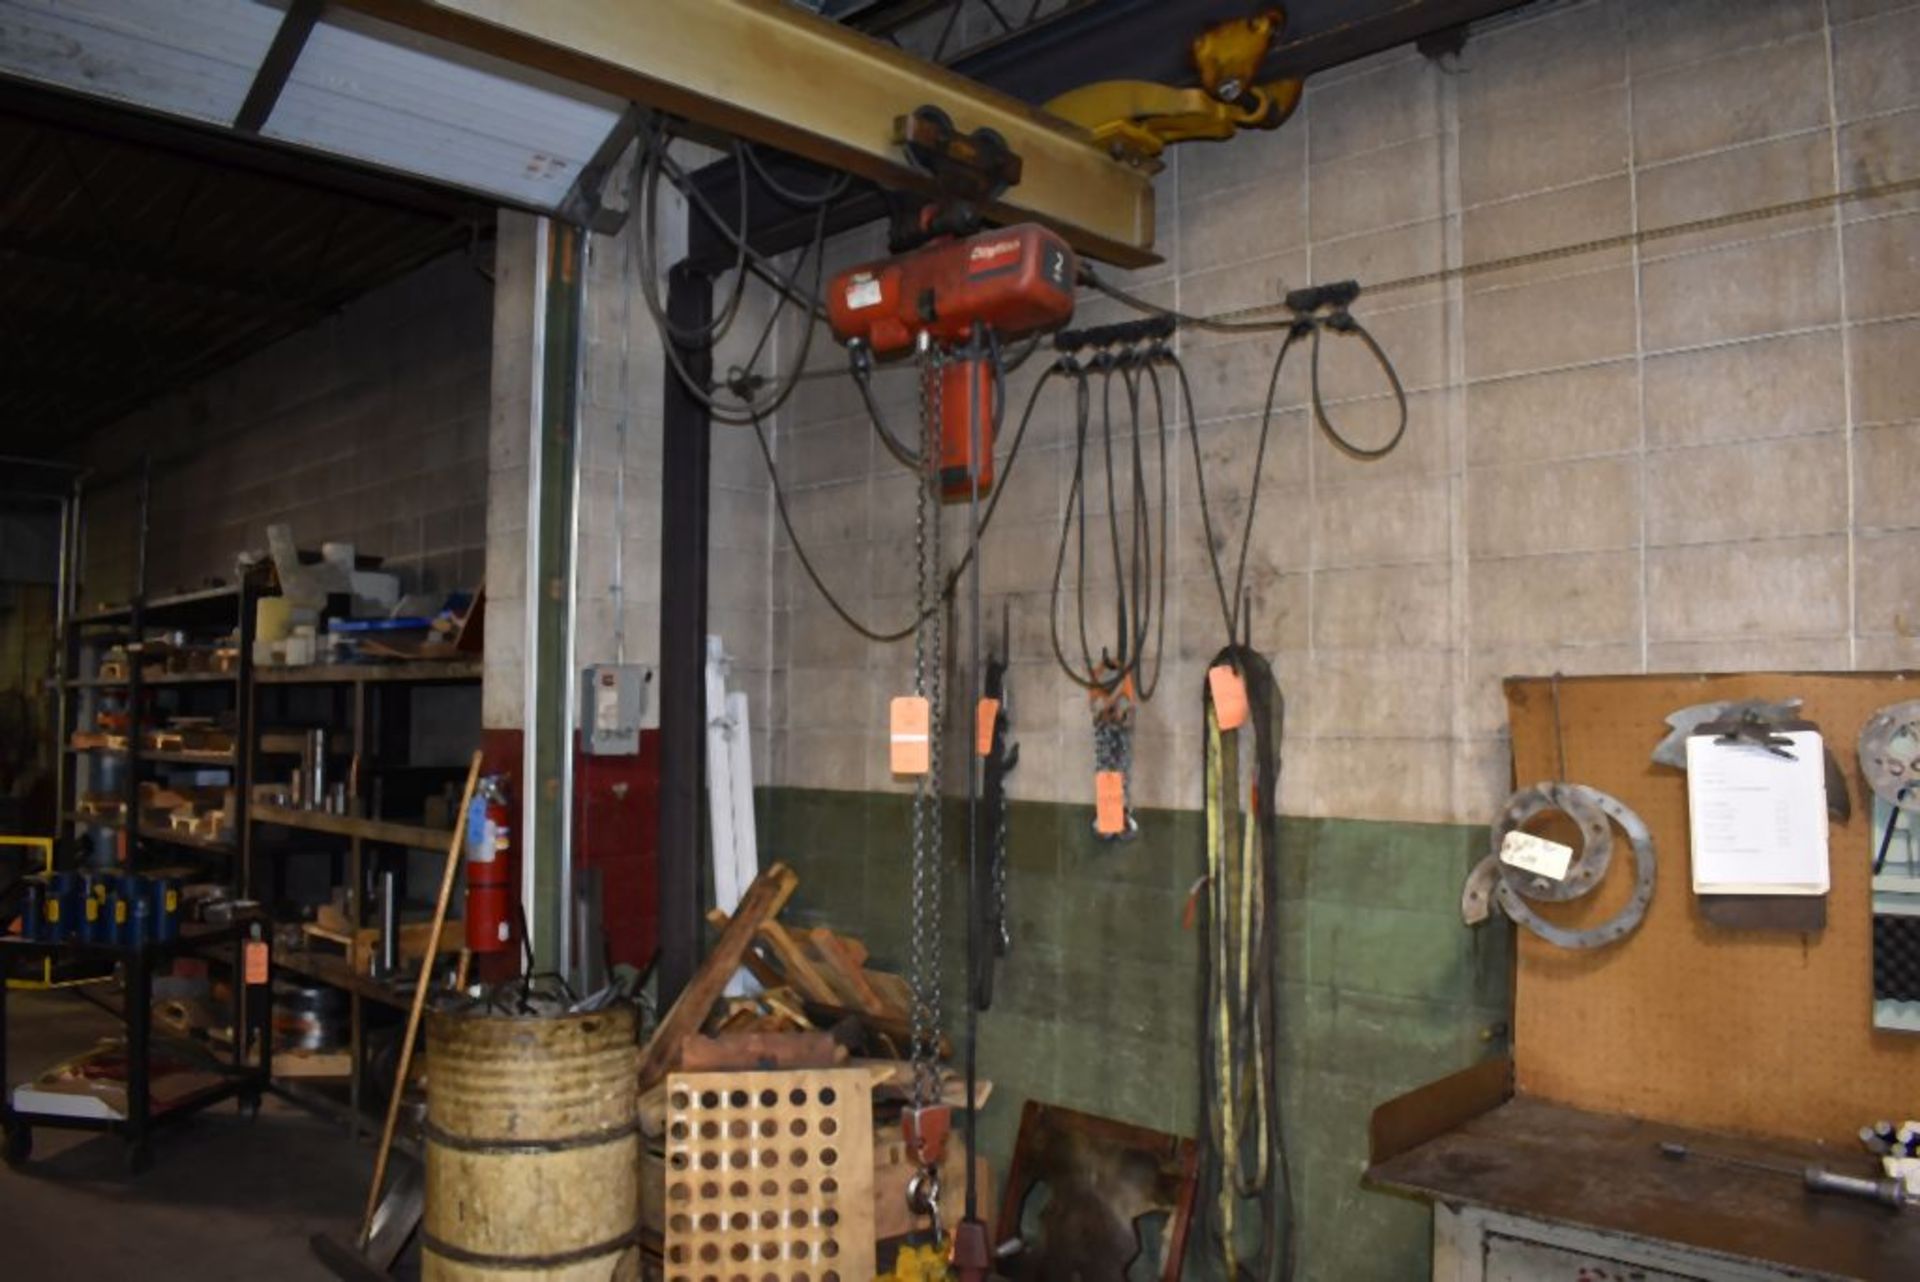 DAYTON 2 TON CHAIN HOIST, PENDANT CONTROL, HARDWIRED, WIRES MUST BE CAPPED